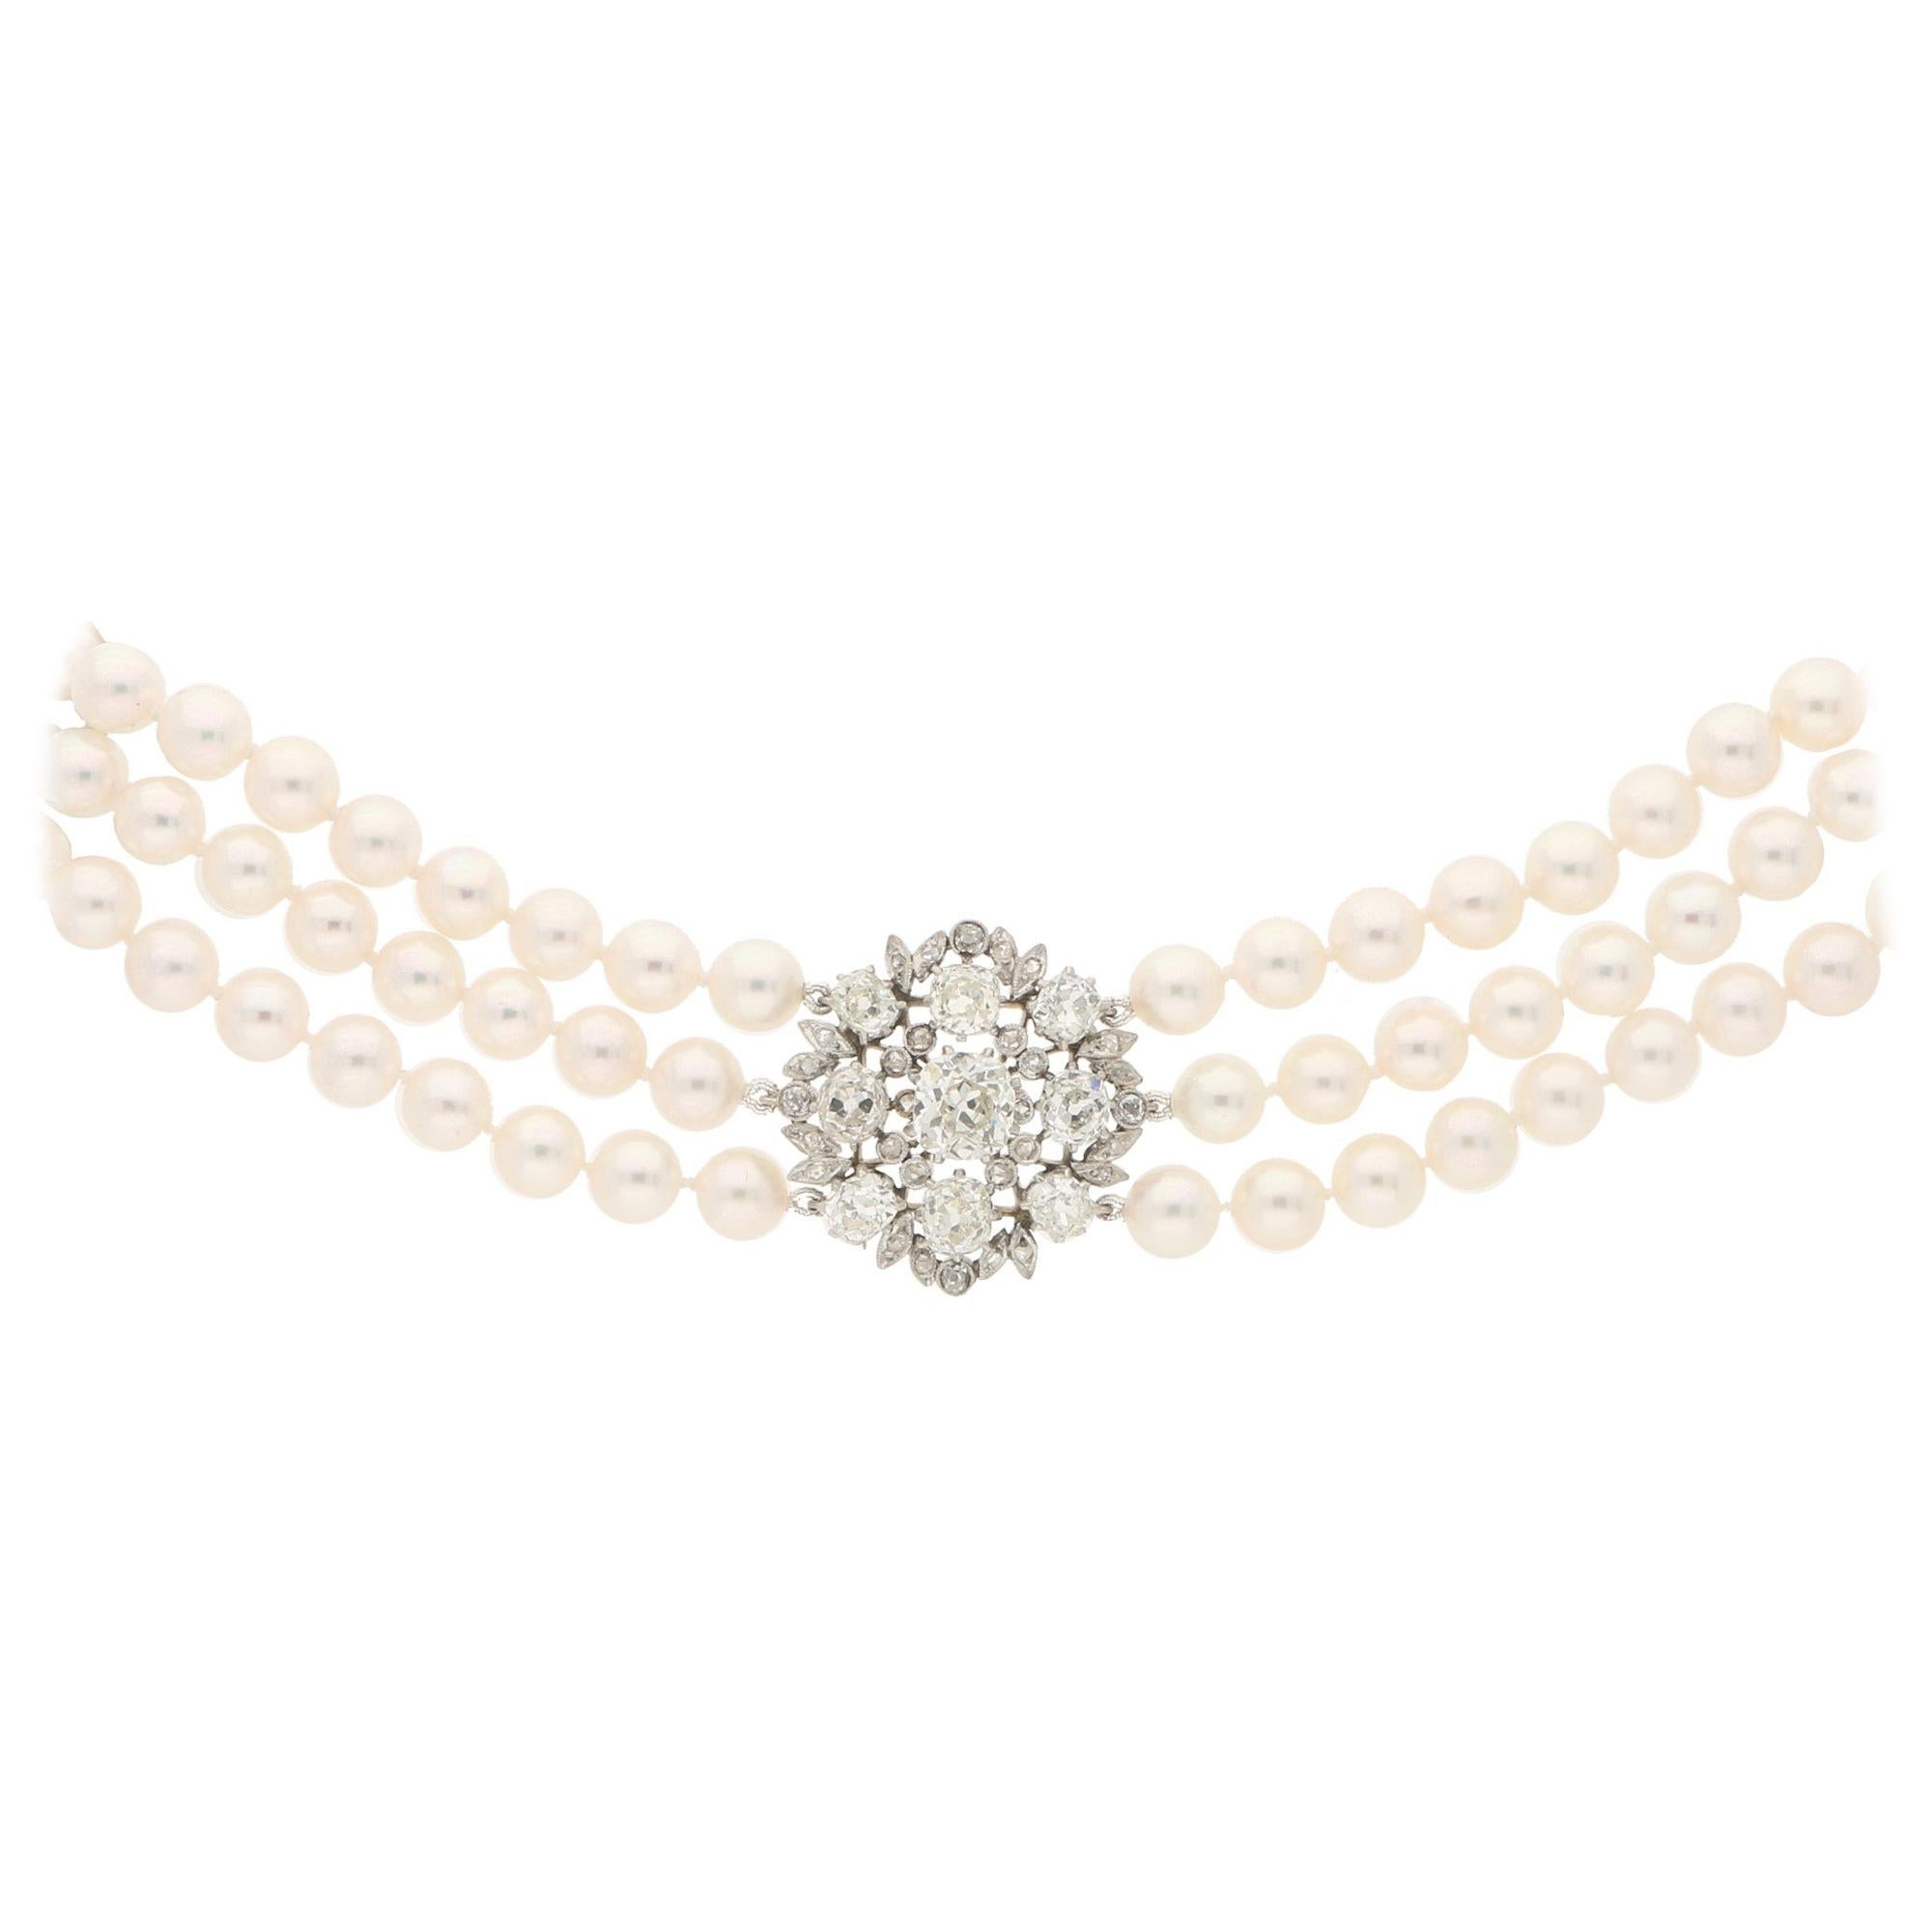 Edwardian Diamond and Cultured Pearl Choker Strand Necklace in Platinum and Gold